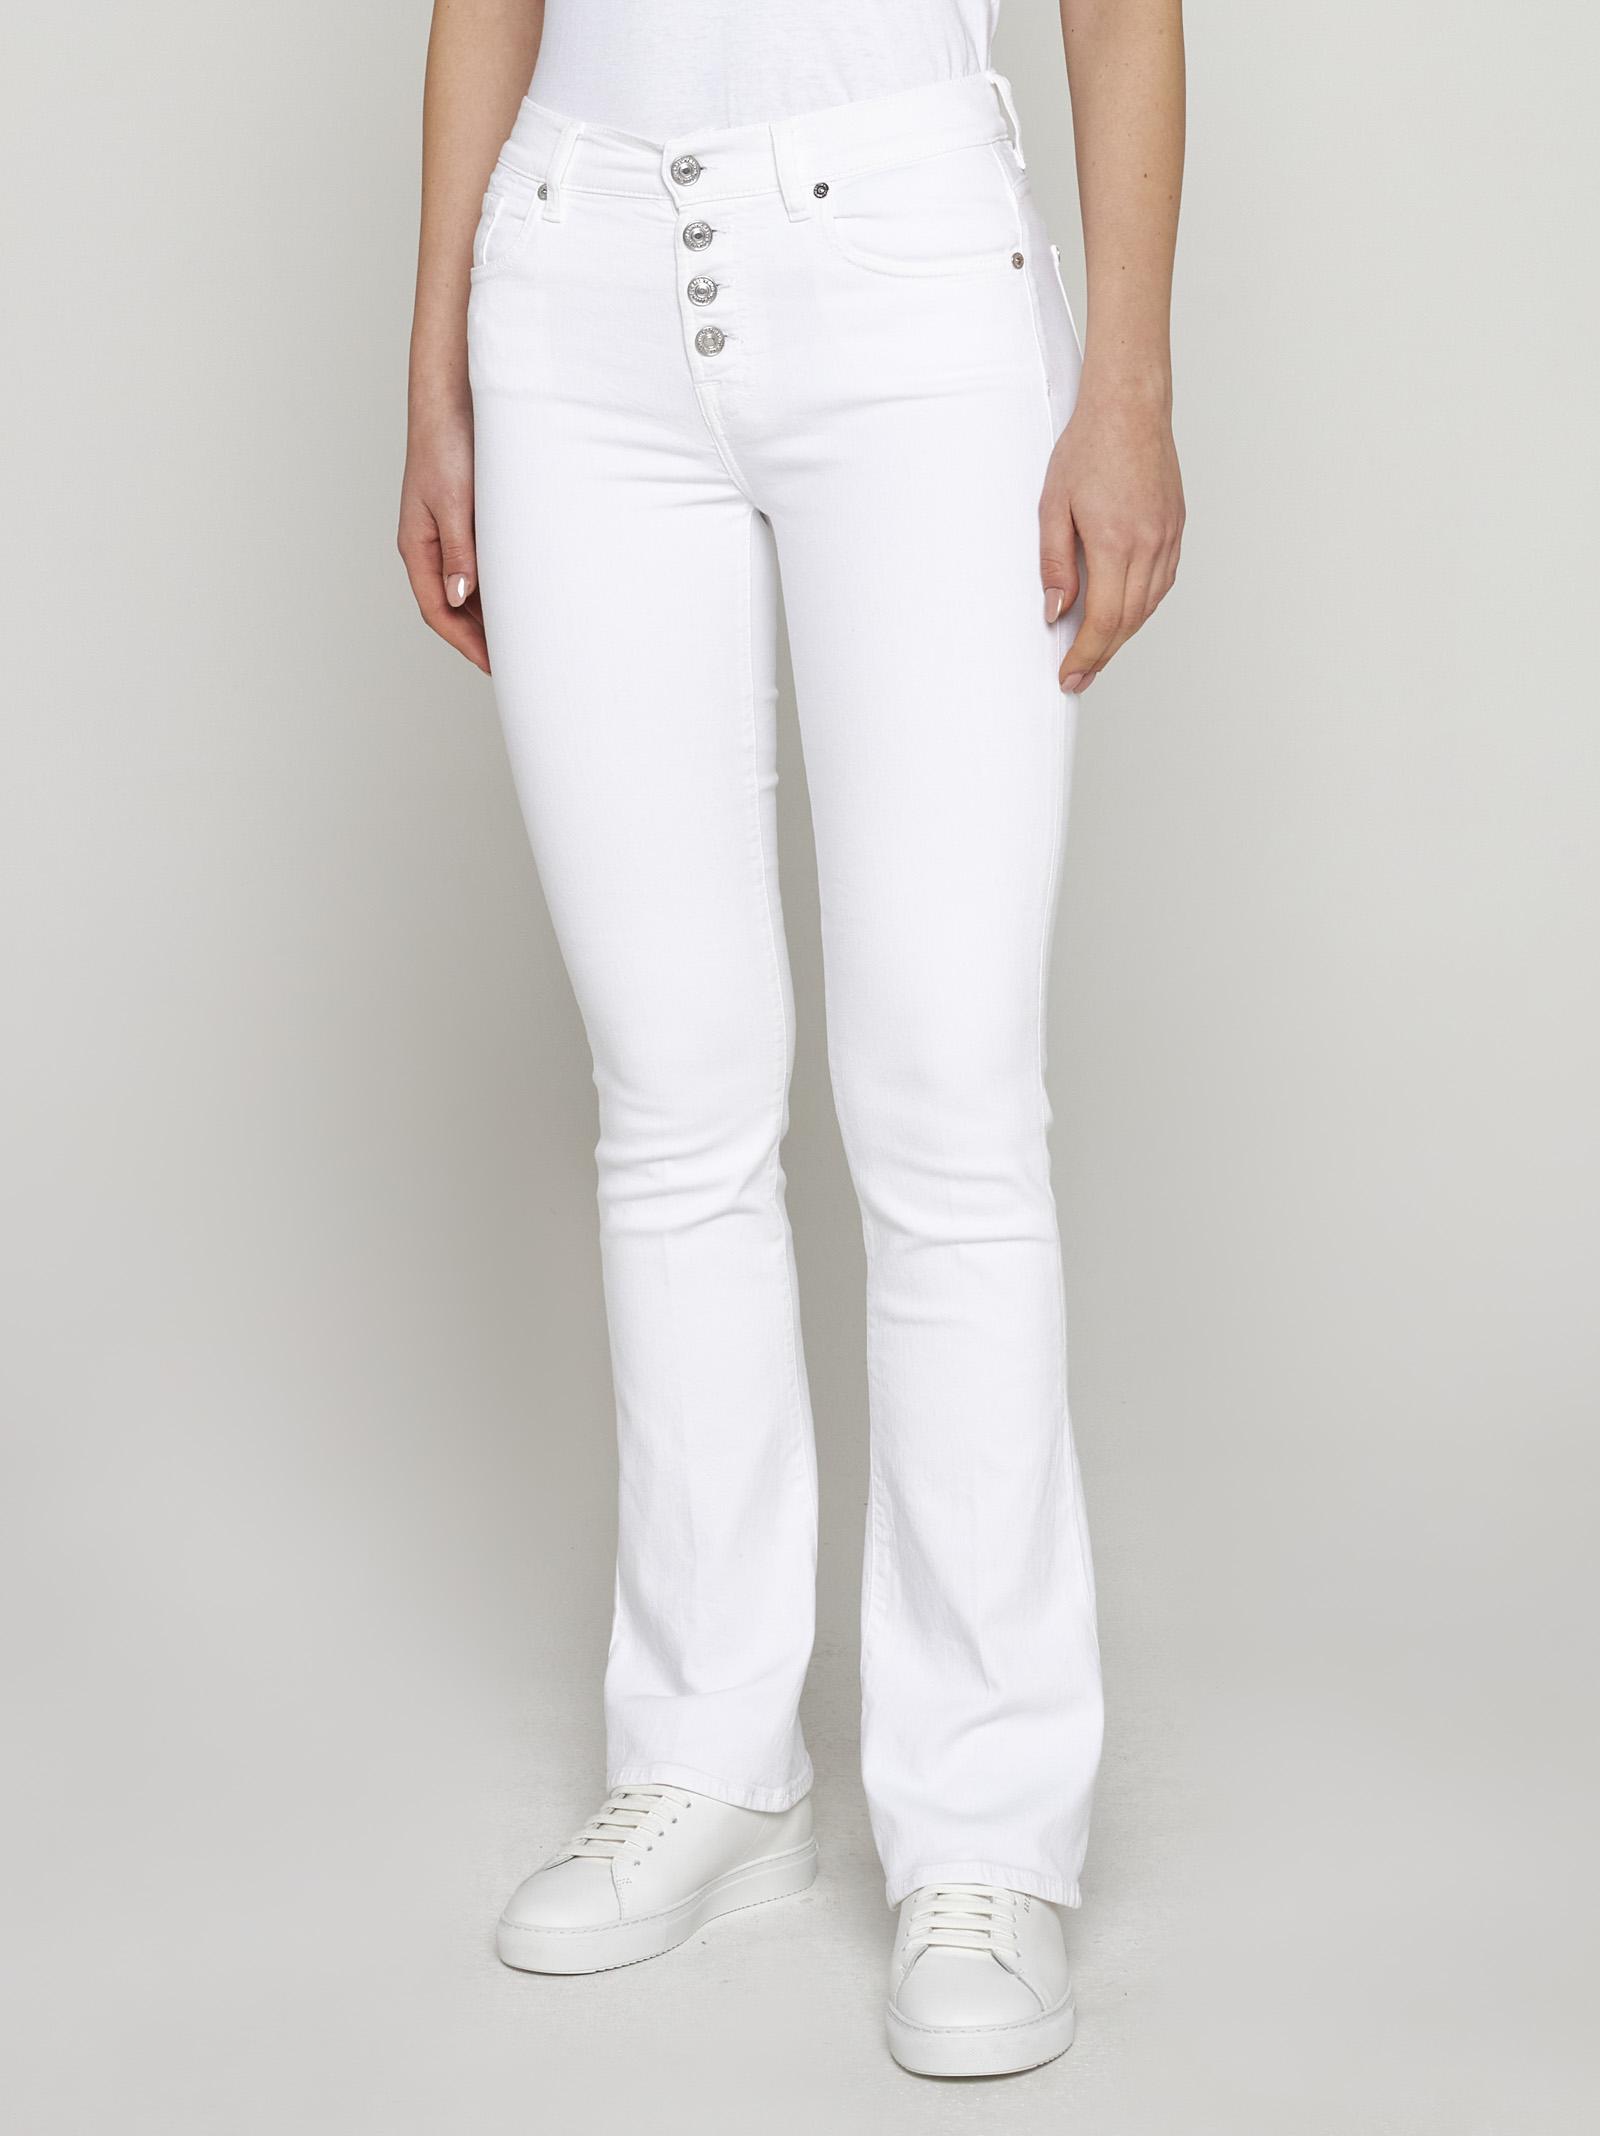 7 For All Mankind Bootcut Tailorless Optic Jeans in White | Lyst